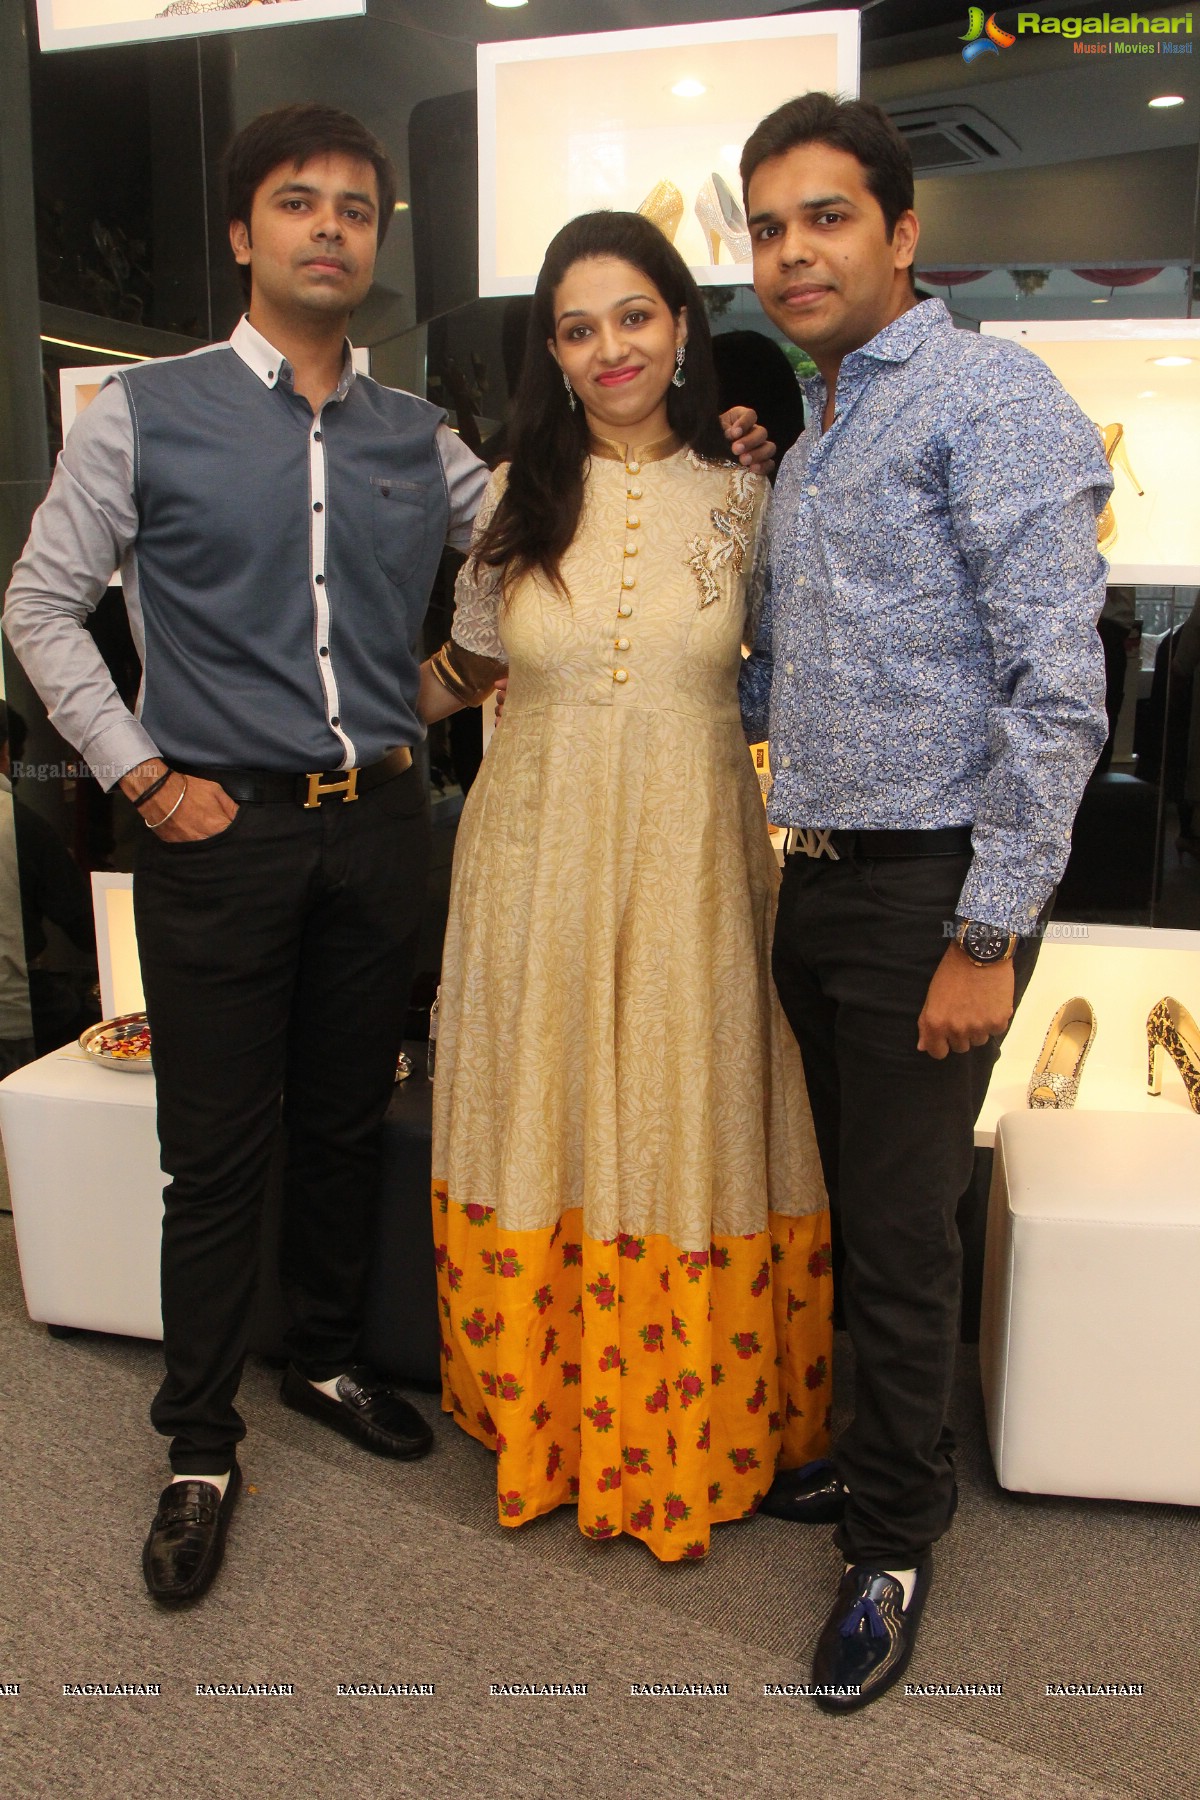 Protoes Store Launch, Hyderabad